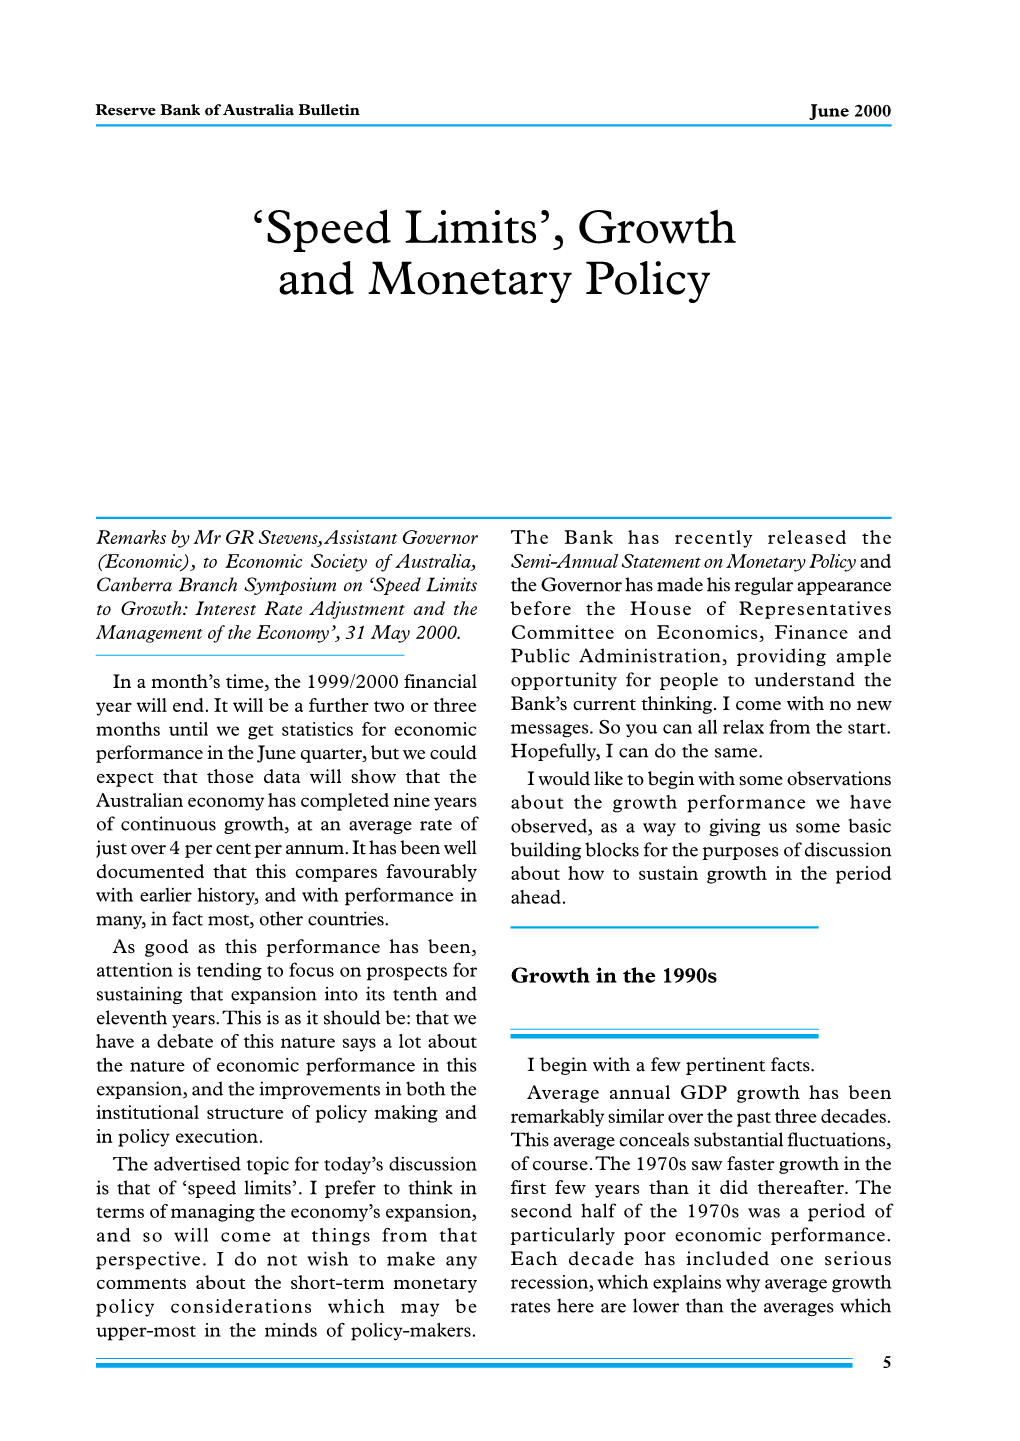 Speed Limits’, Growth and Monetary Policy